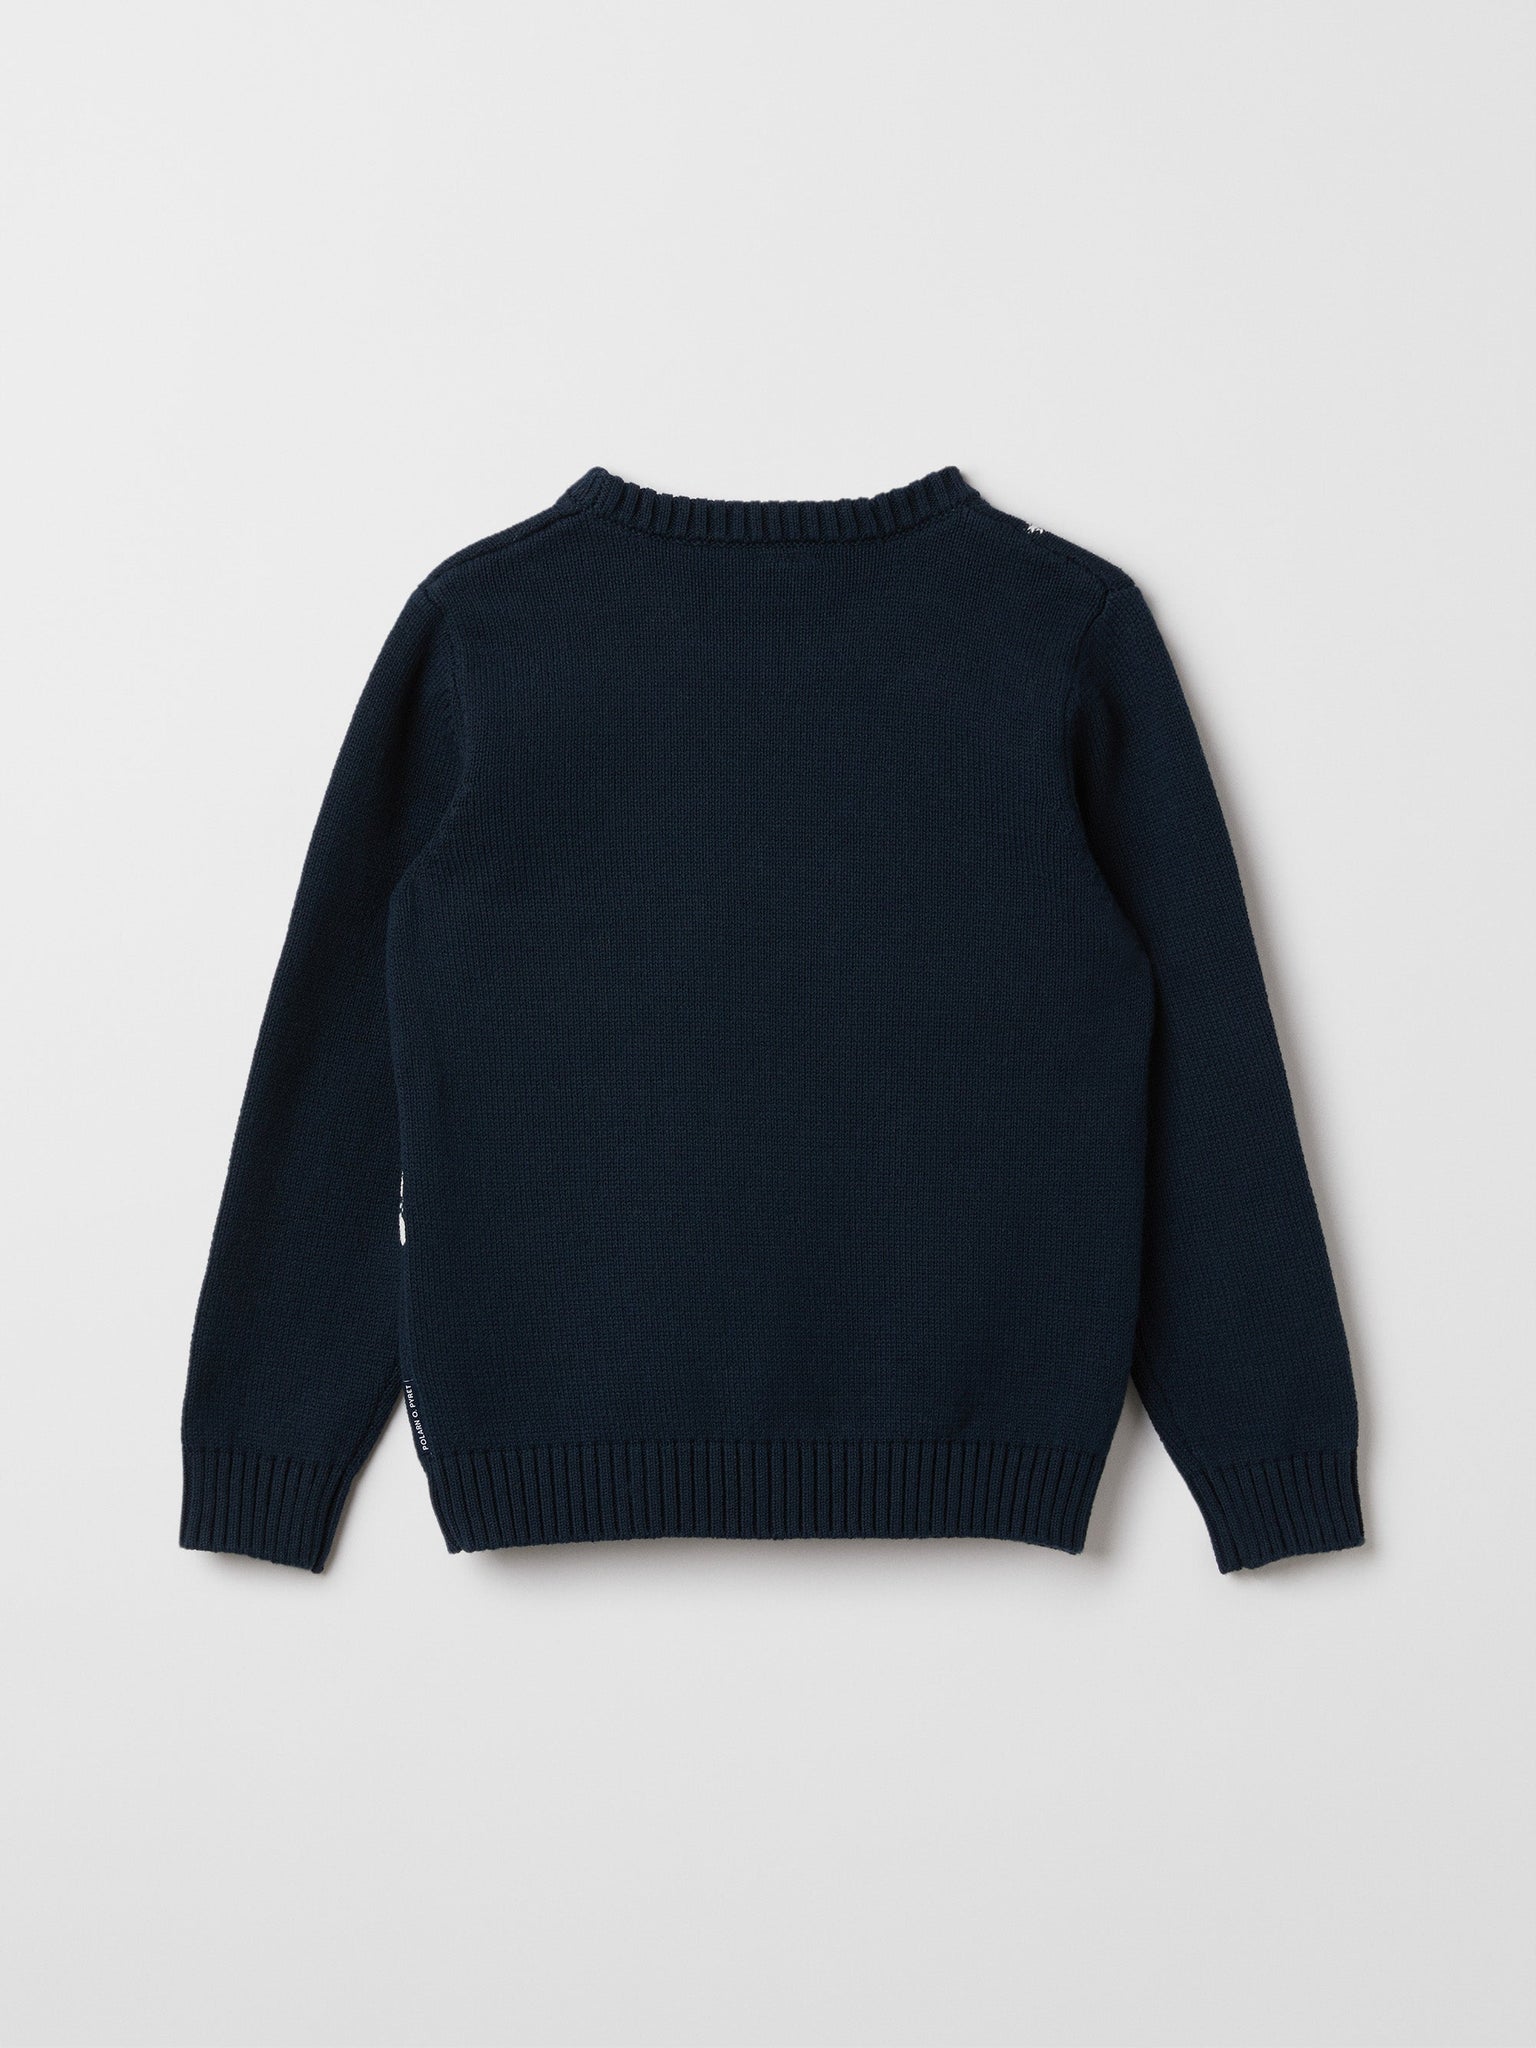 Organic Cotton Kids Christmas Jumper from the Polarn O. Pyret kidswear collection. Ethically produced kids clothing.